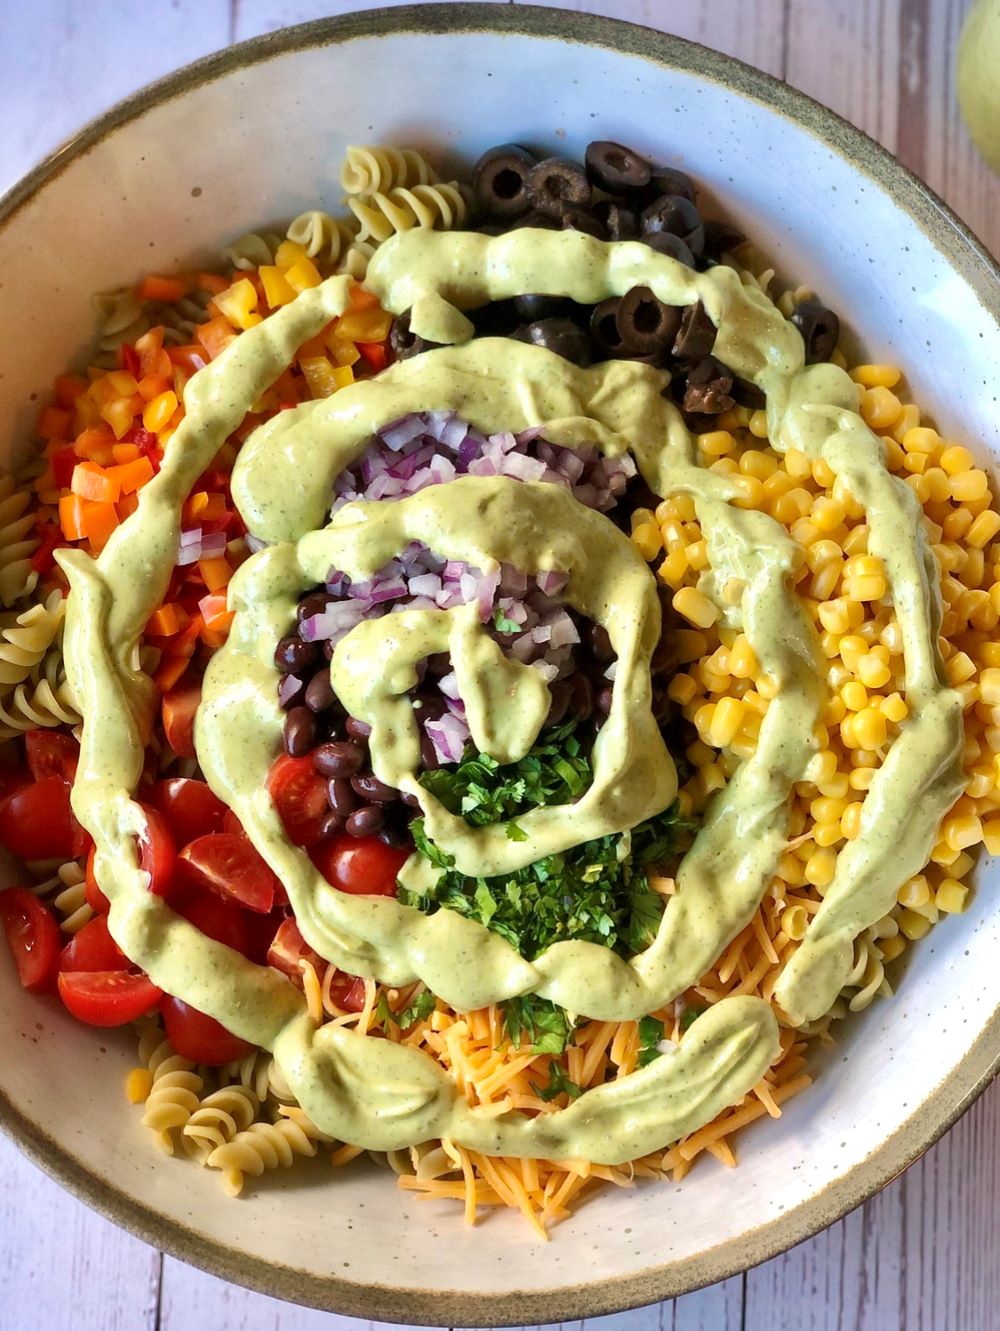 Southwest Pasta Salad with Avocado Ranch Dressing